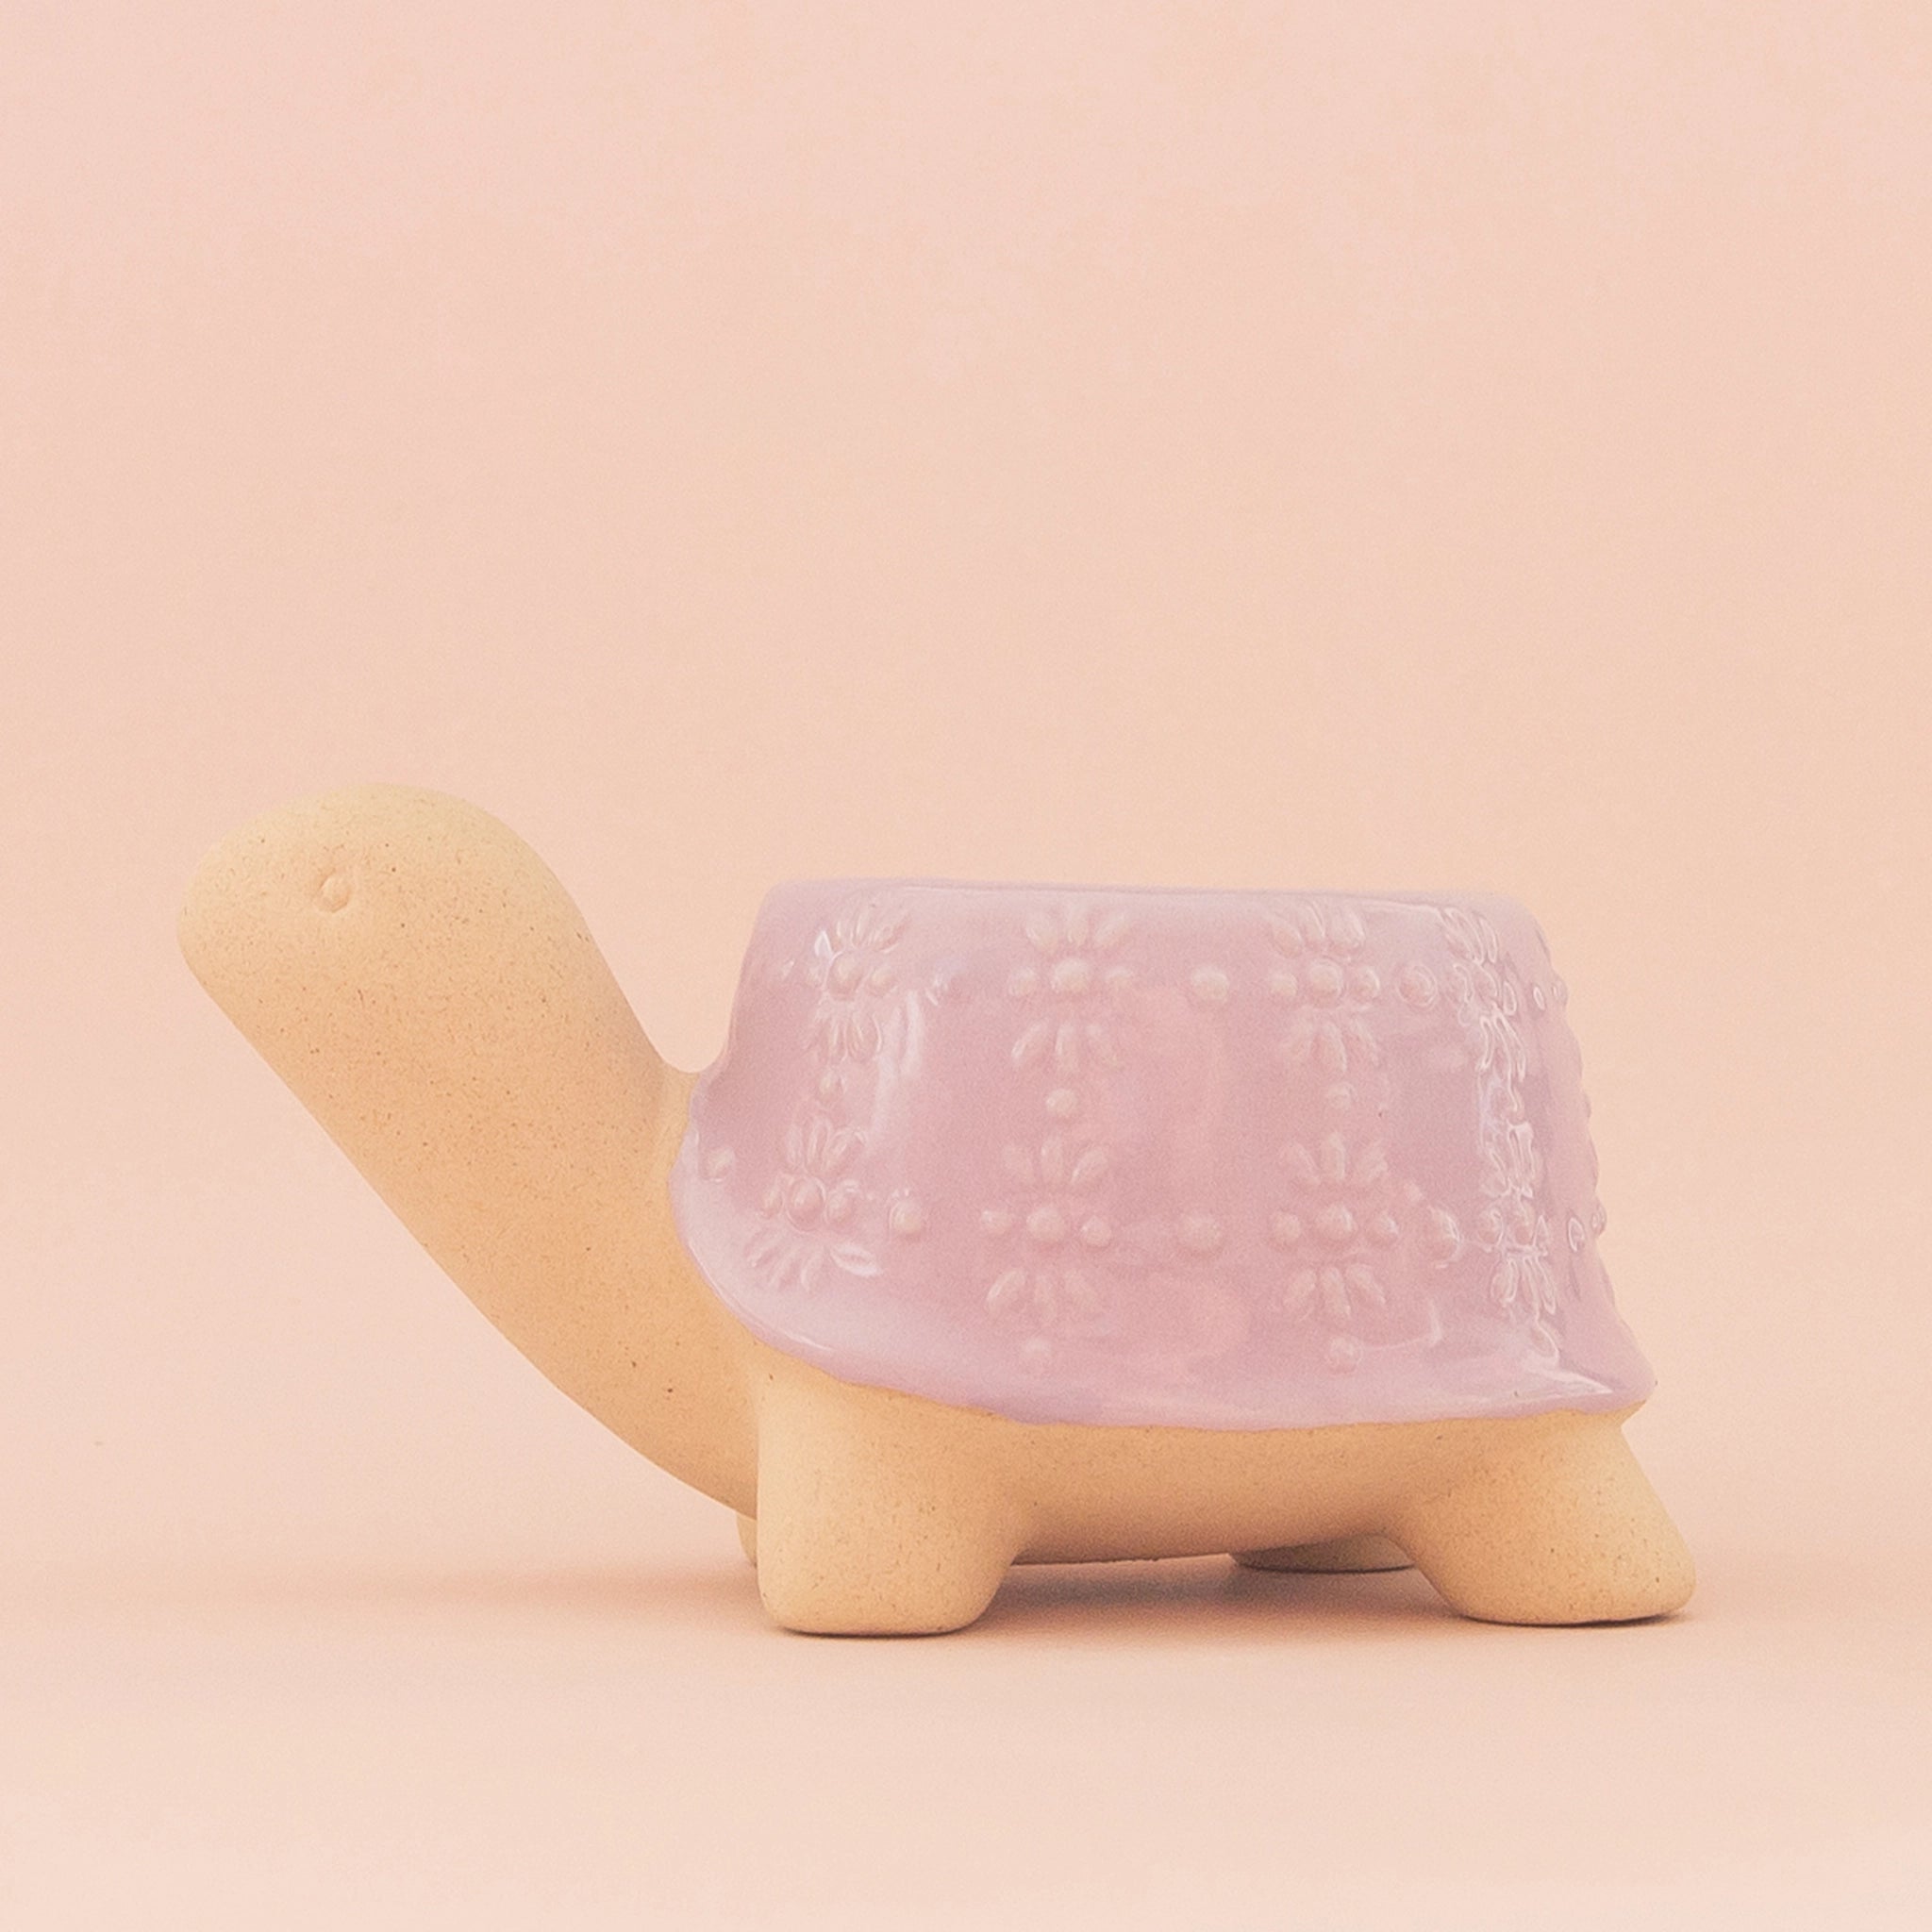 On a peachy background is lilac ceramic turtle shaped planter.